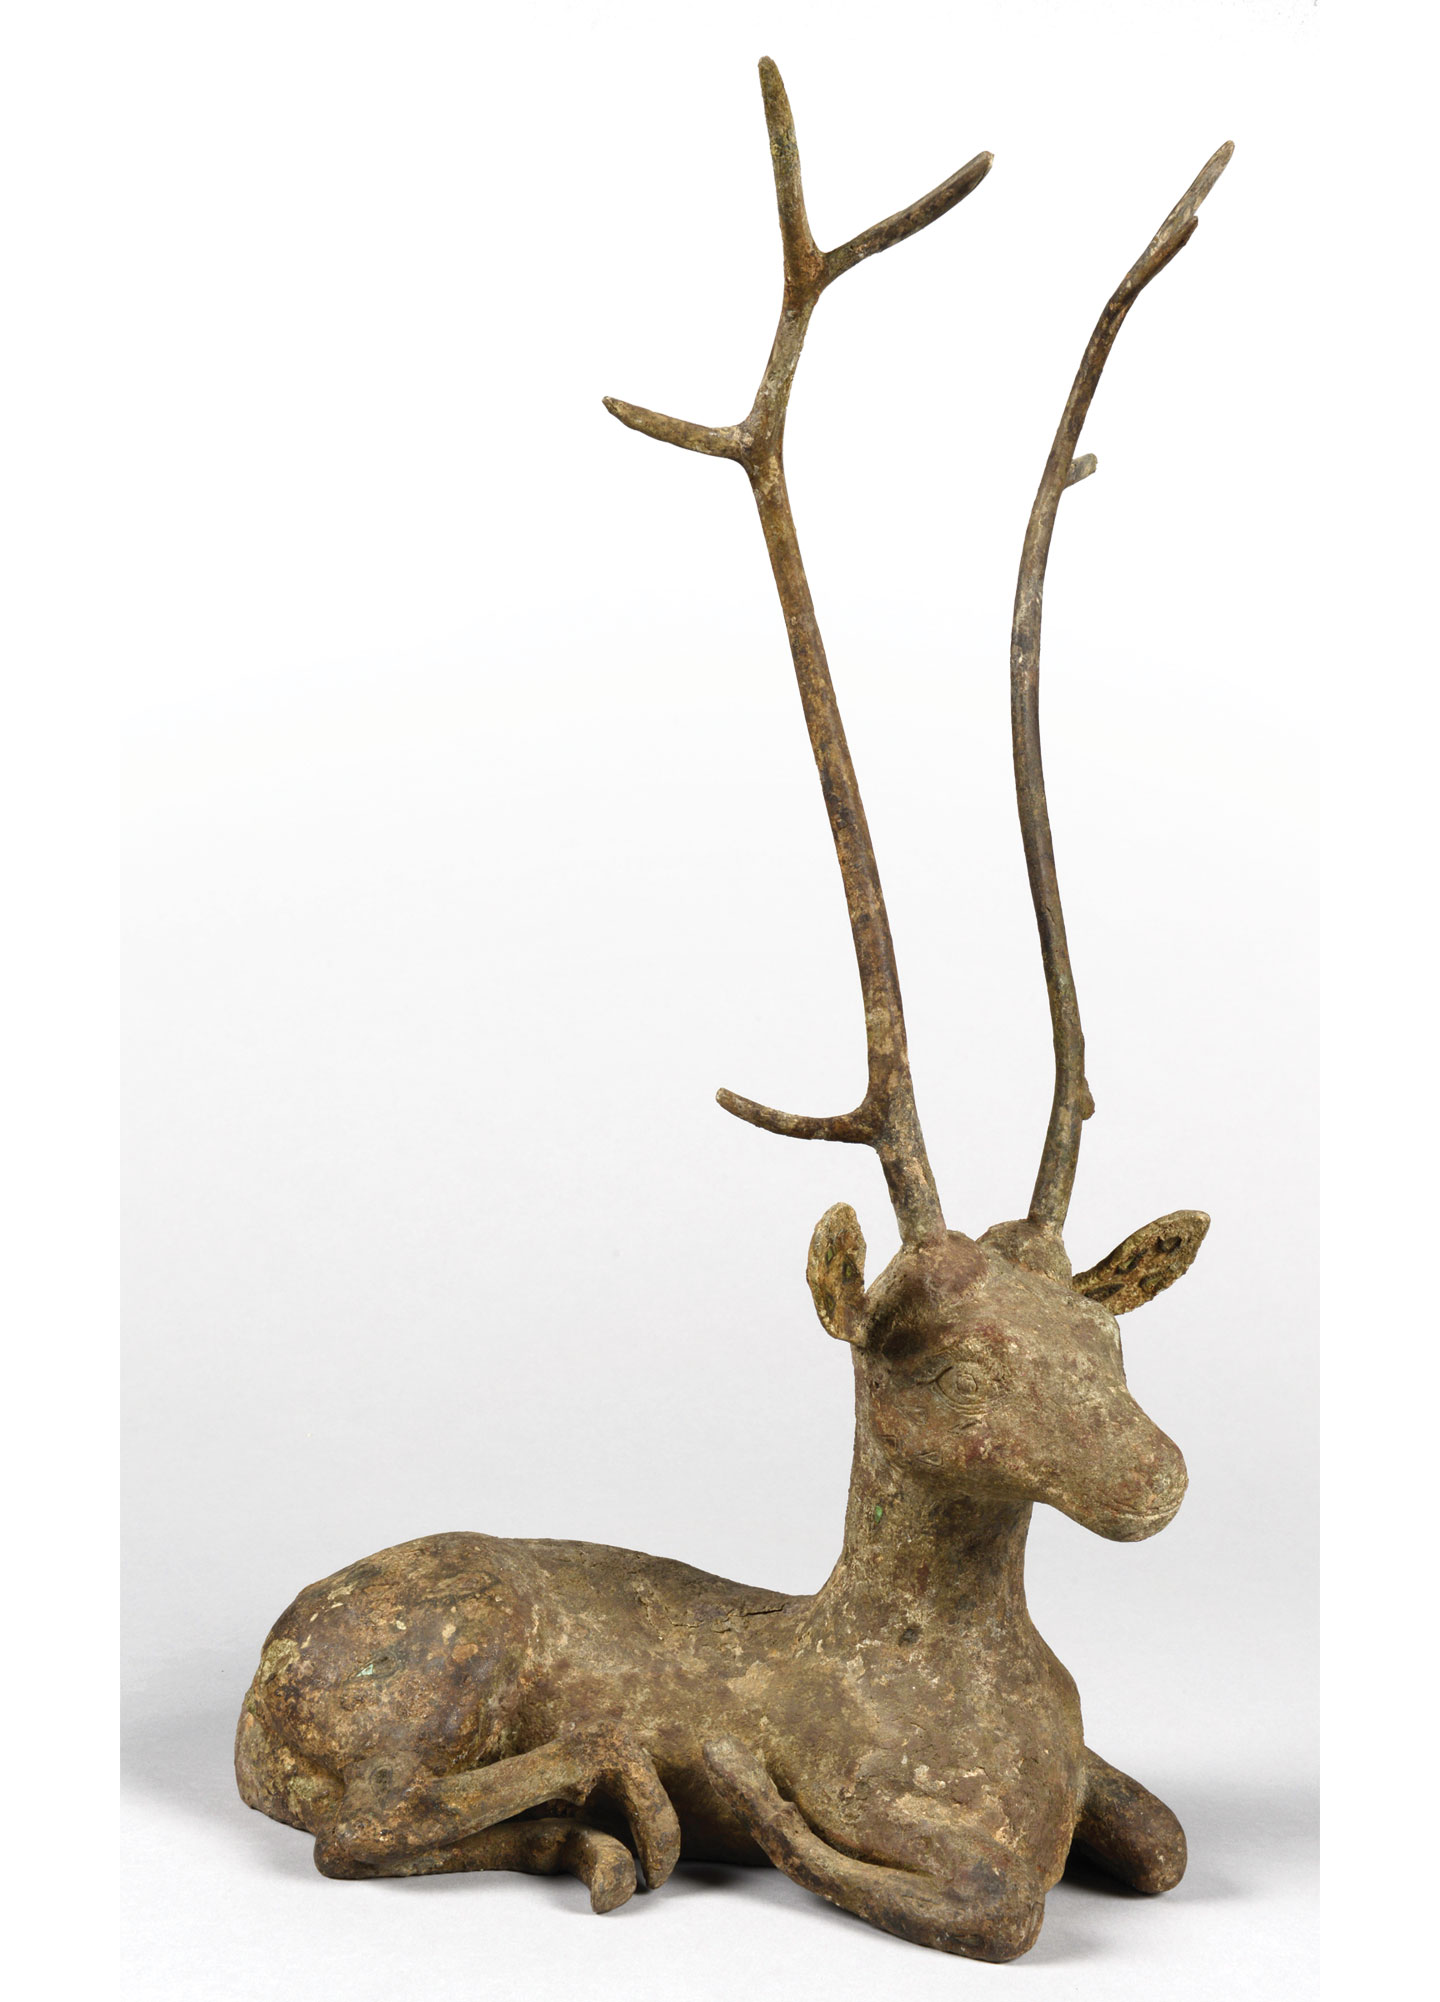 Bronze Deer Inlaid with Gems<br>
Western Han or earlier<br>
Height (including antlers): 52 cm<br>
Length: 26 cm<br>
Unearthed in the Western Han Tomb at Sanlidun, Lianshui County, Jiangsu Province<br>
<br>
The Bronze Deer is on display in the Art Museum of CUHK in the exhibition ‘From the Realm of the Immortals: Meanings and Representations of the Deer from the Nanjing Museum’, until 28 May 2017